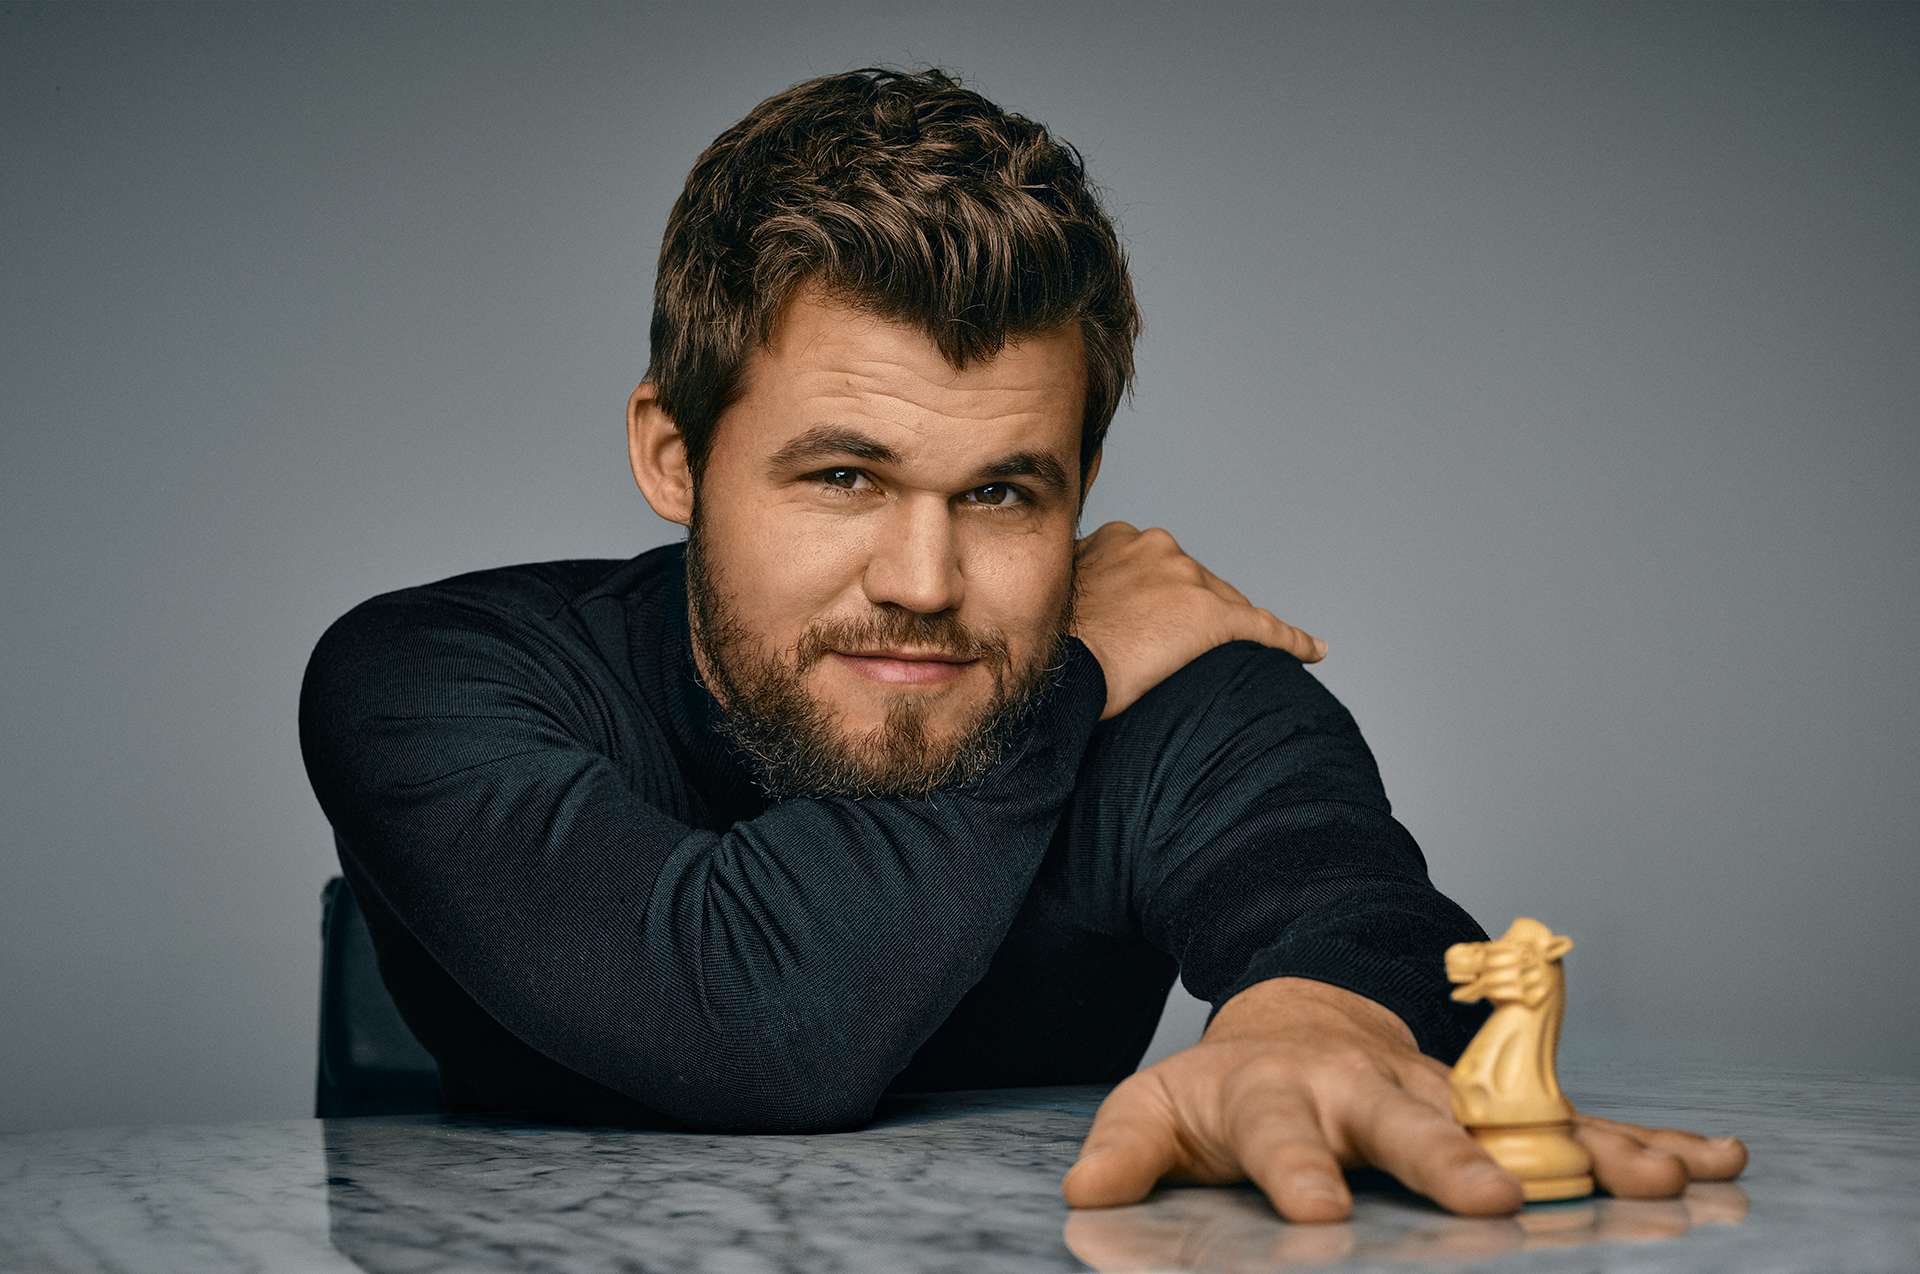 Checkmate Your Reading List: Magnus Carlsen’s Top Picks for Chess Enthusiasts